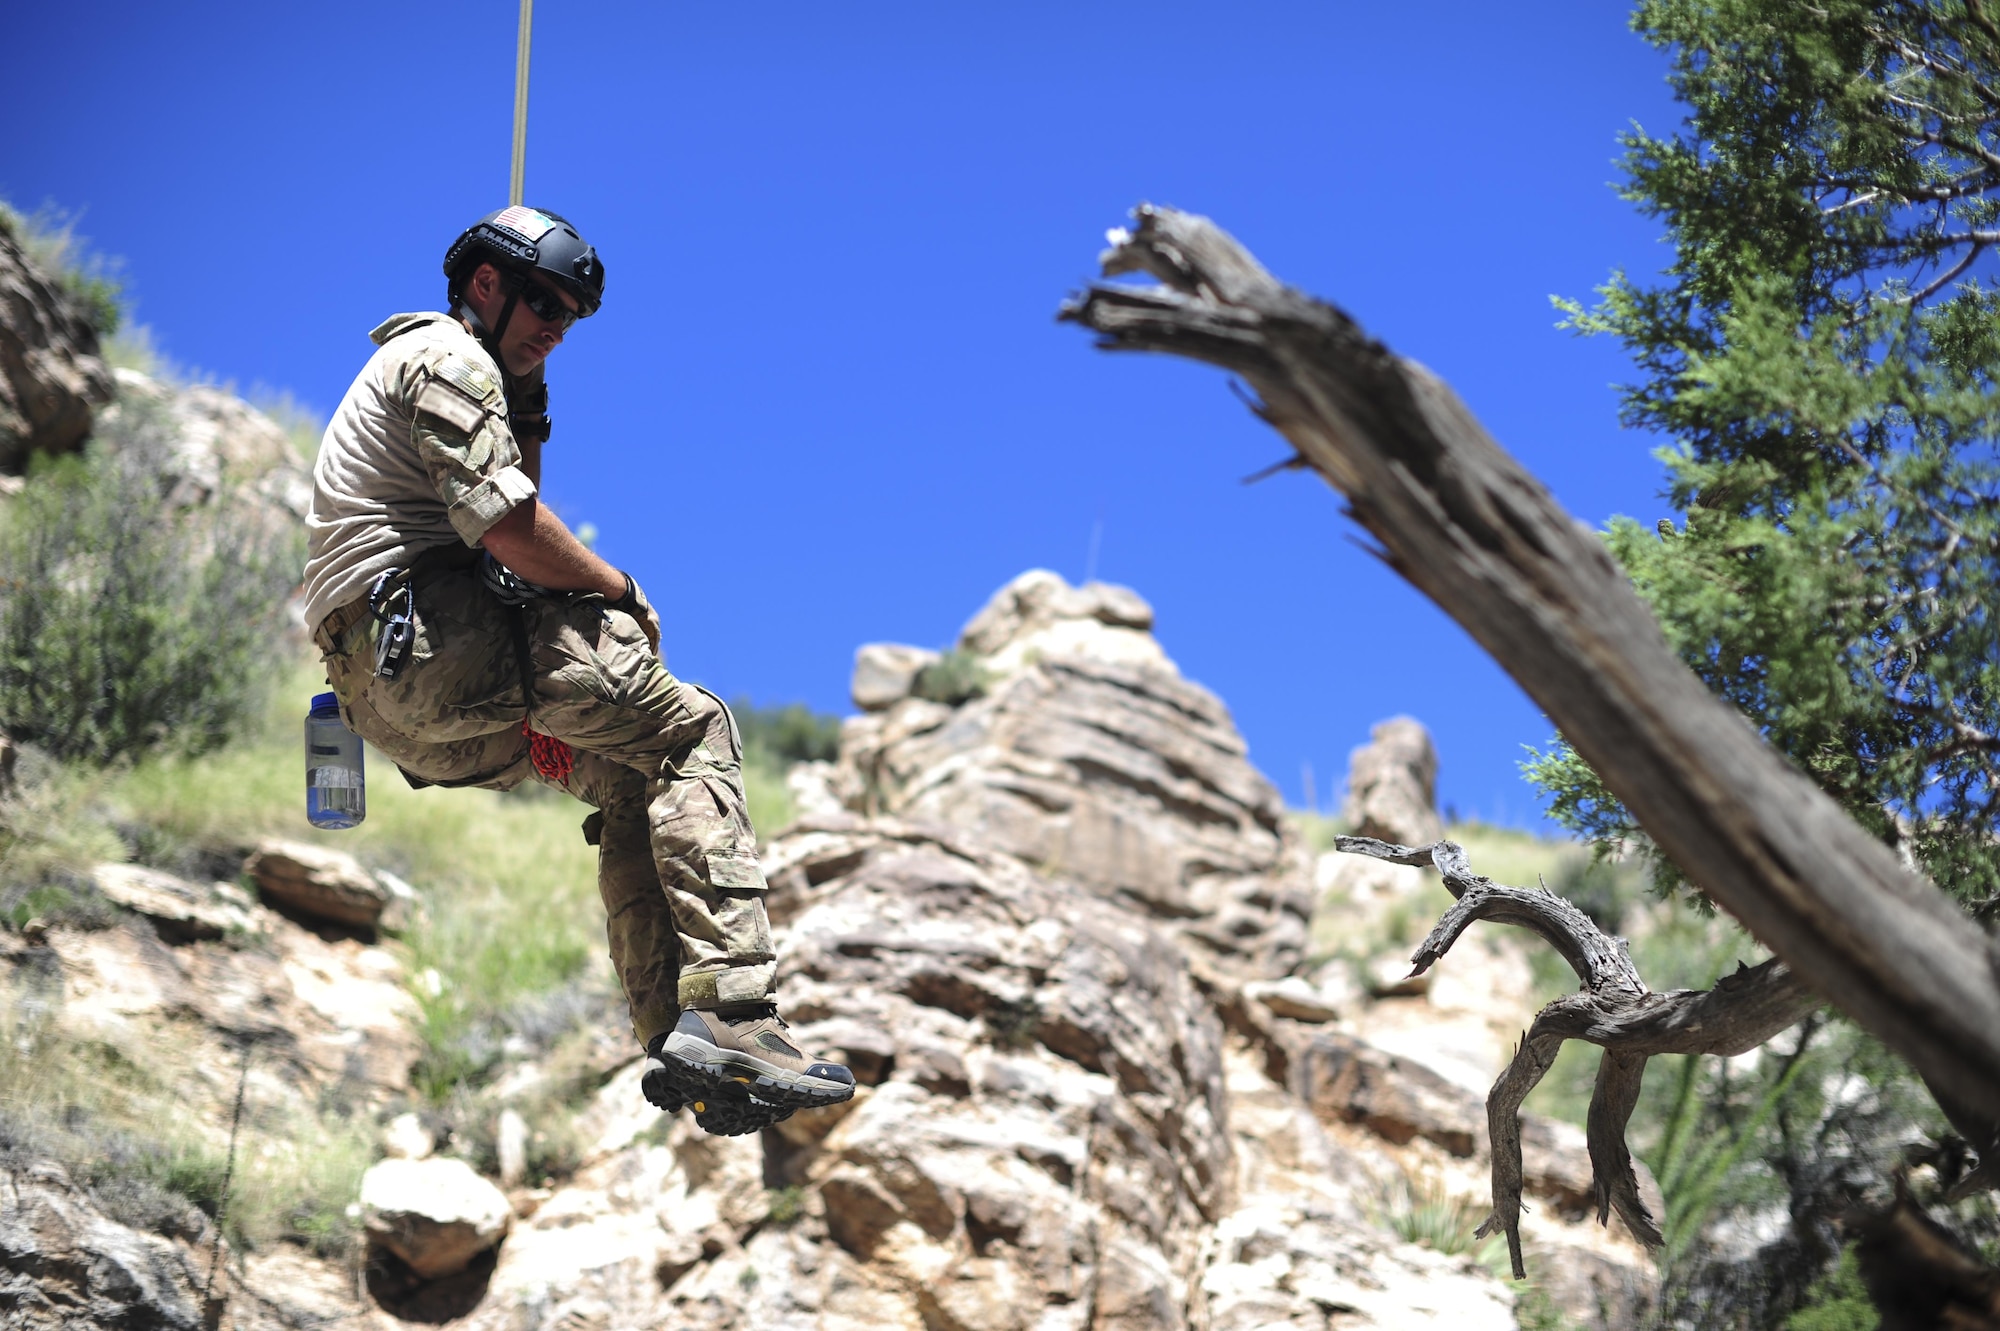 A pararescueman from the 48th Rescue Squadron descends into a ravine from a highline at the Coronado National Forest in Tucson, Ariz., Sept. 16, 2016. The 48th RQS provides highly trained experts capable of executing personnel recovery operations across the spectrum of conflict. (U.S. Air Force photo by Airman Nathan H. Barbour)